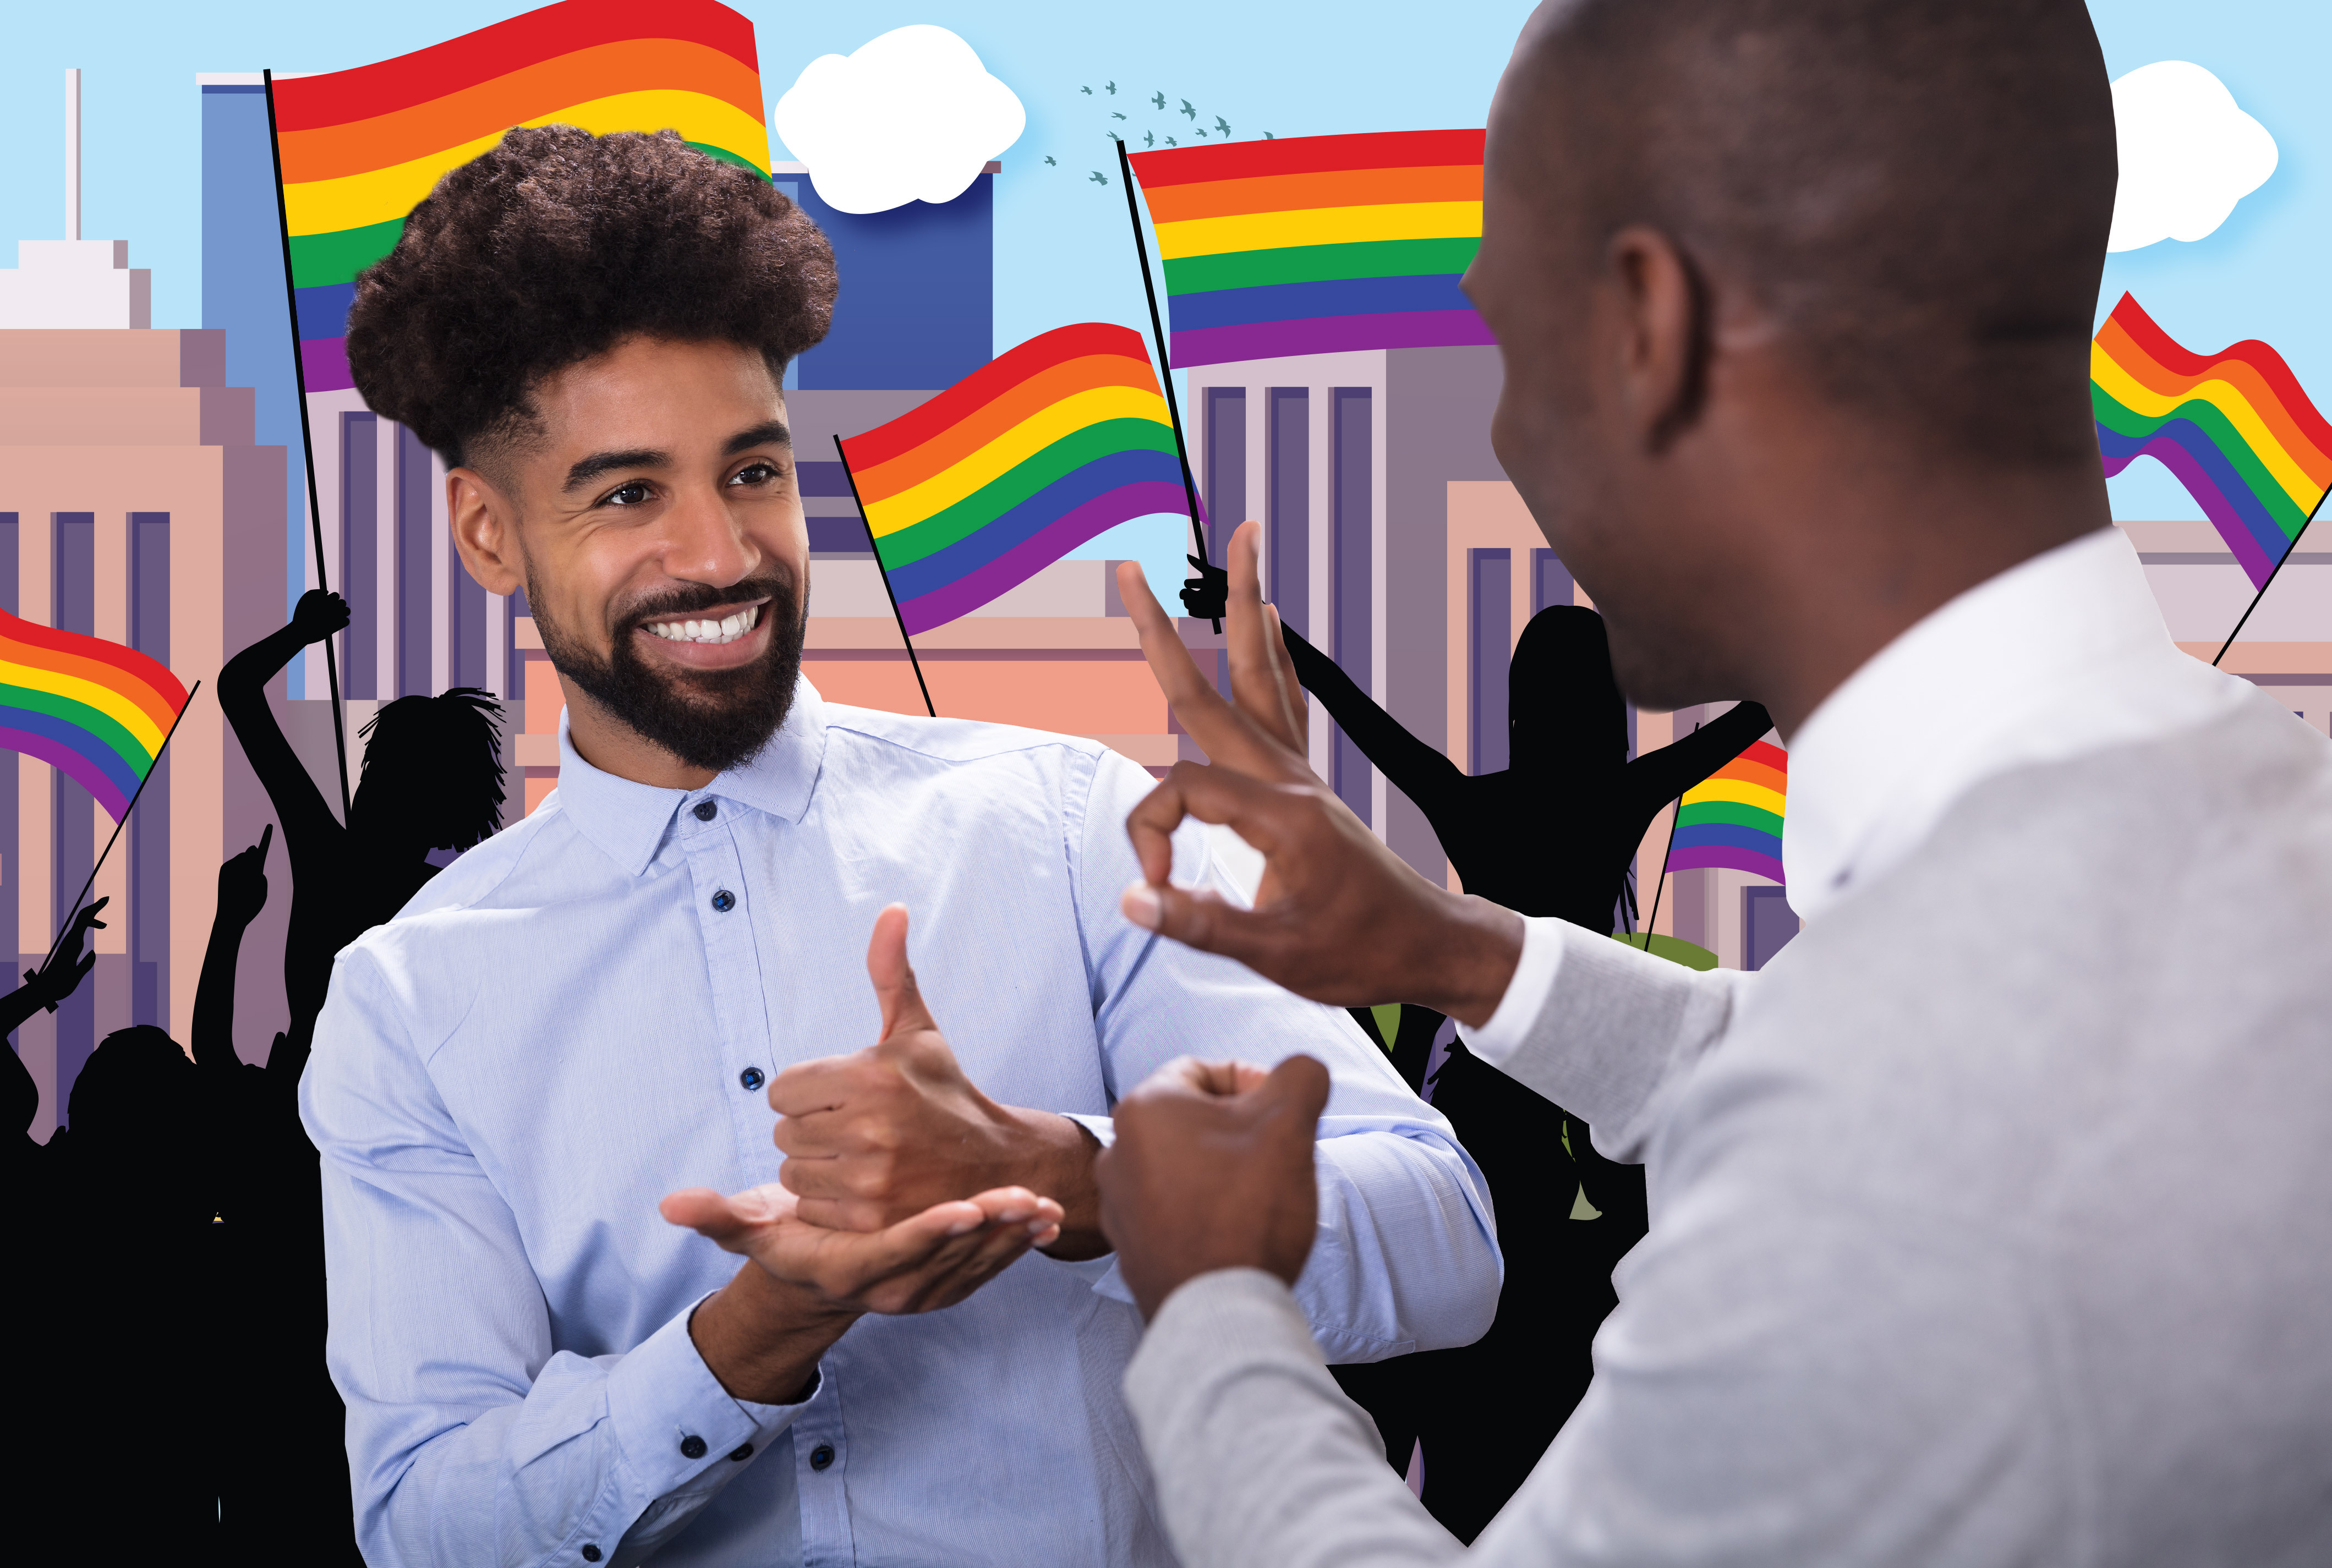 Two people signing to each other and smiling. One is signing 'support' and one is signing 'OK'. Behind them is a street scene with people waving rainbow flags for Pride.